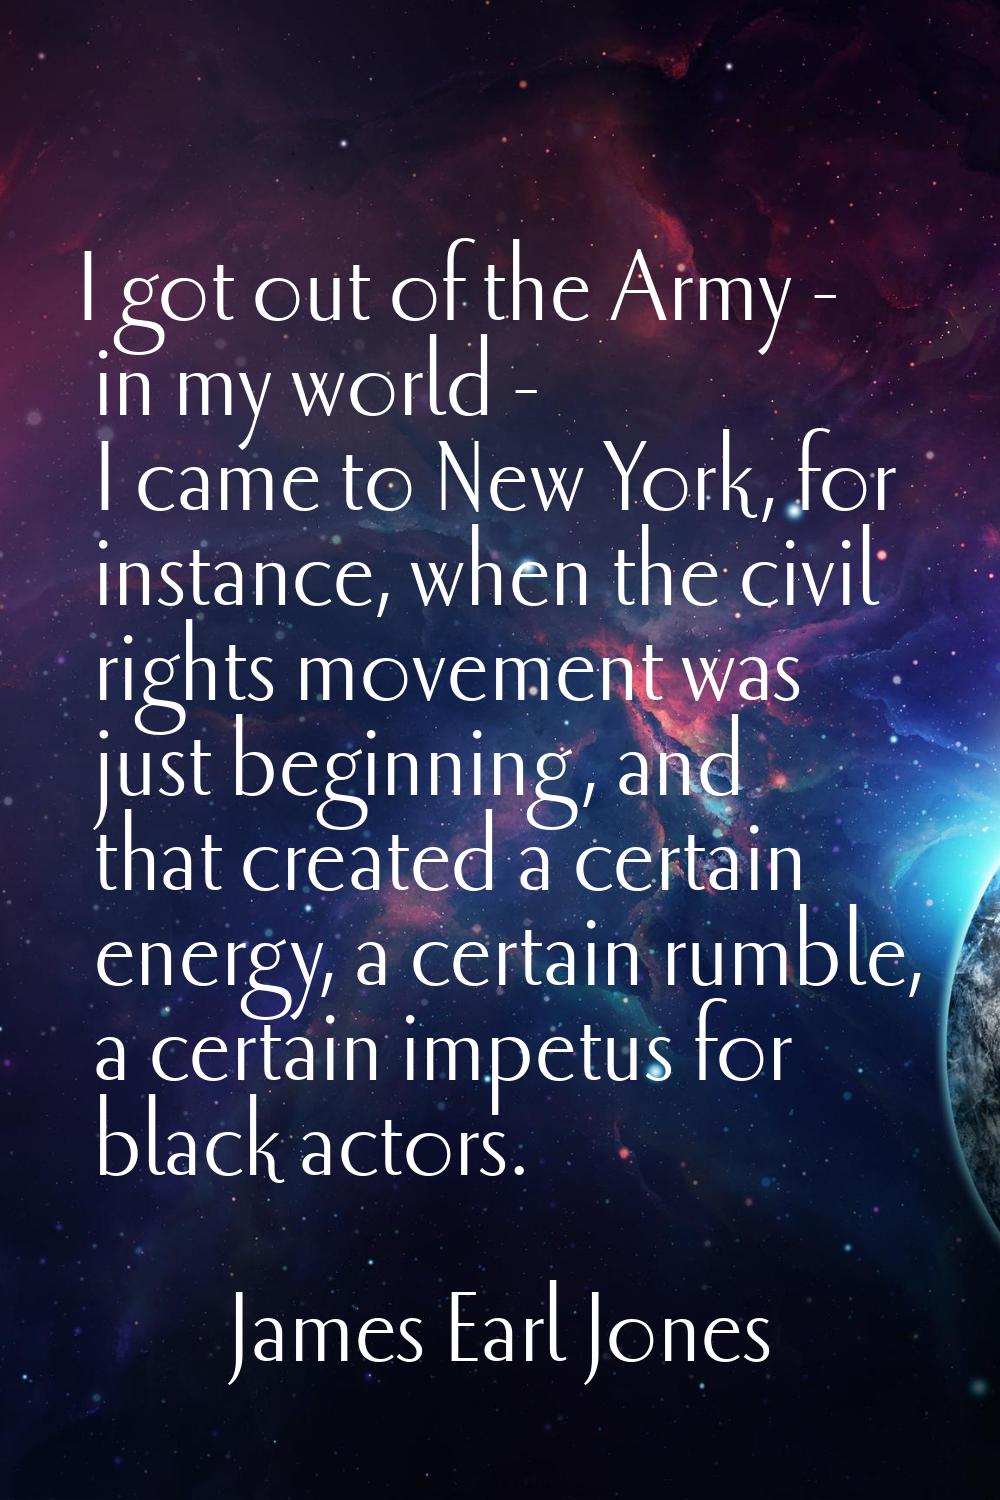 I got out of the Army - in my world - I came to New York, for instance, when the civil rights movem